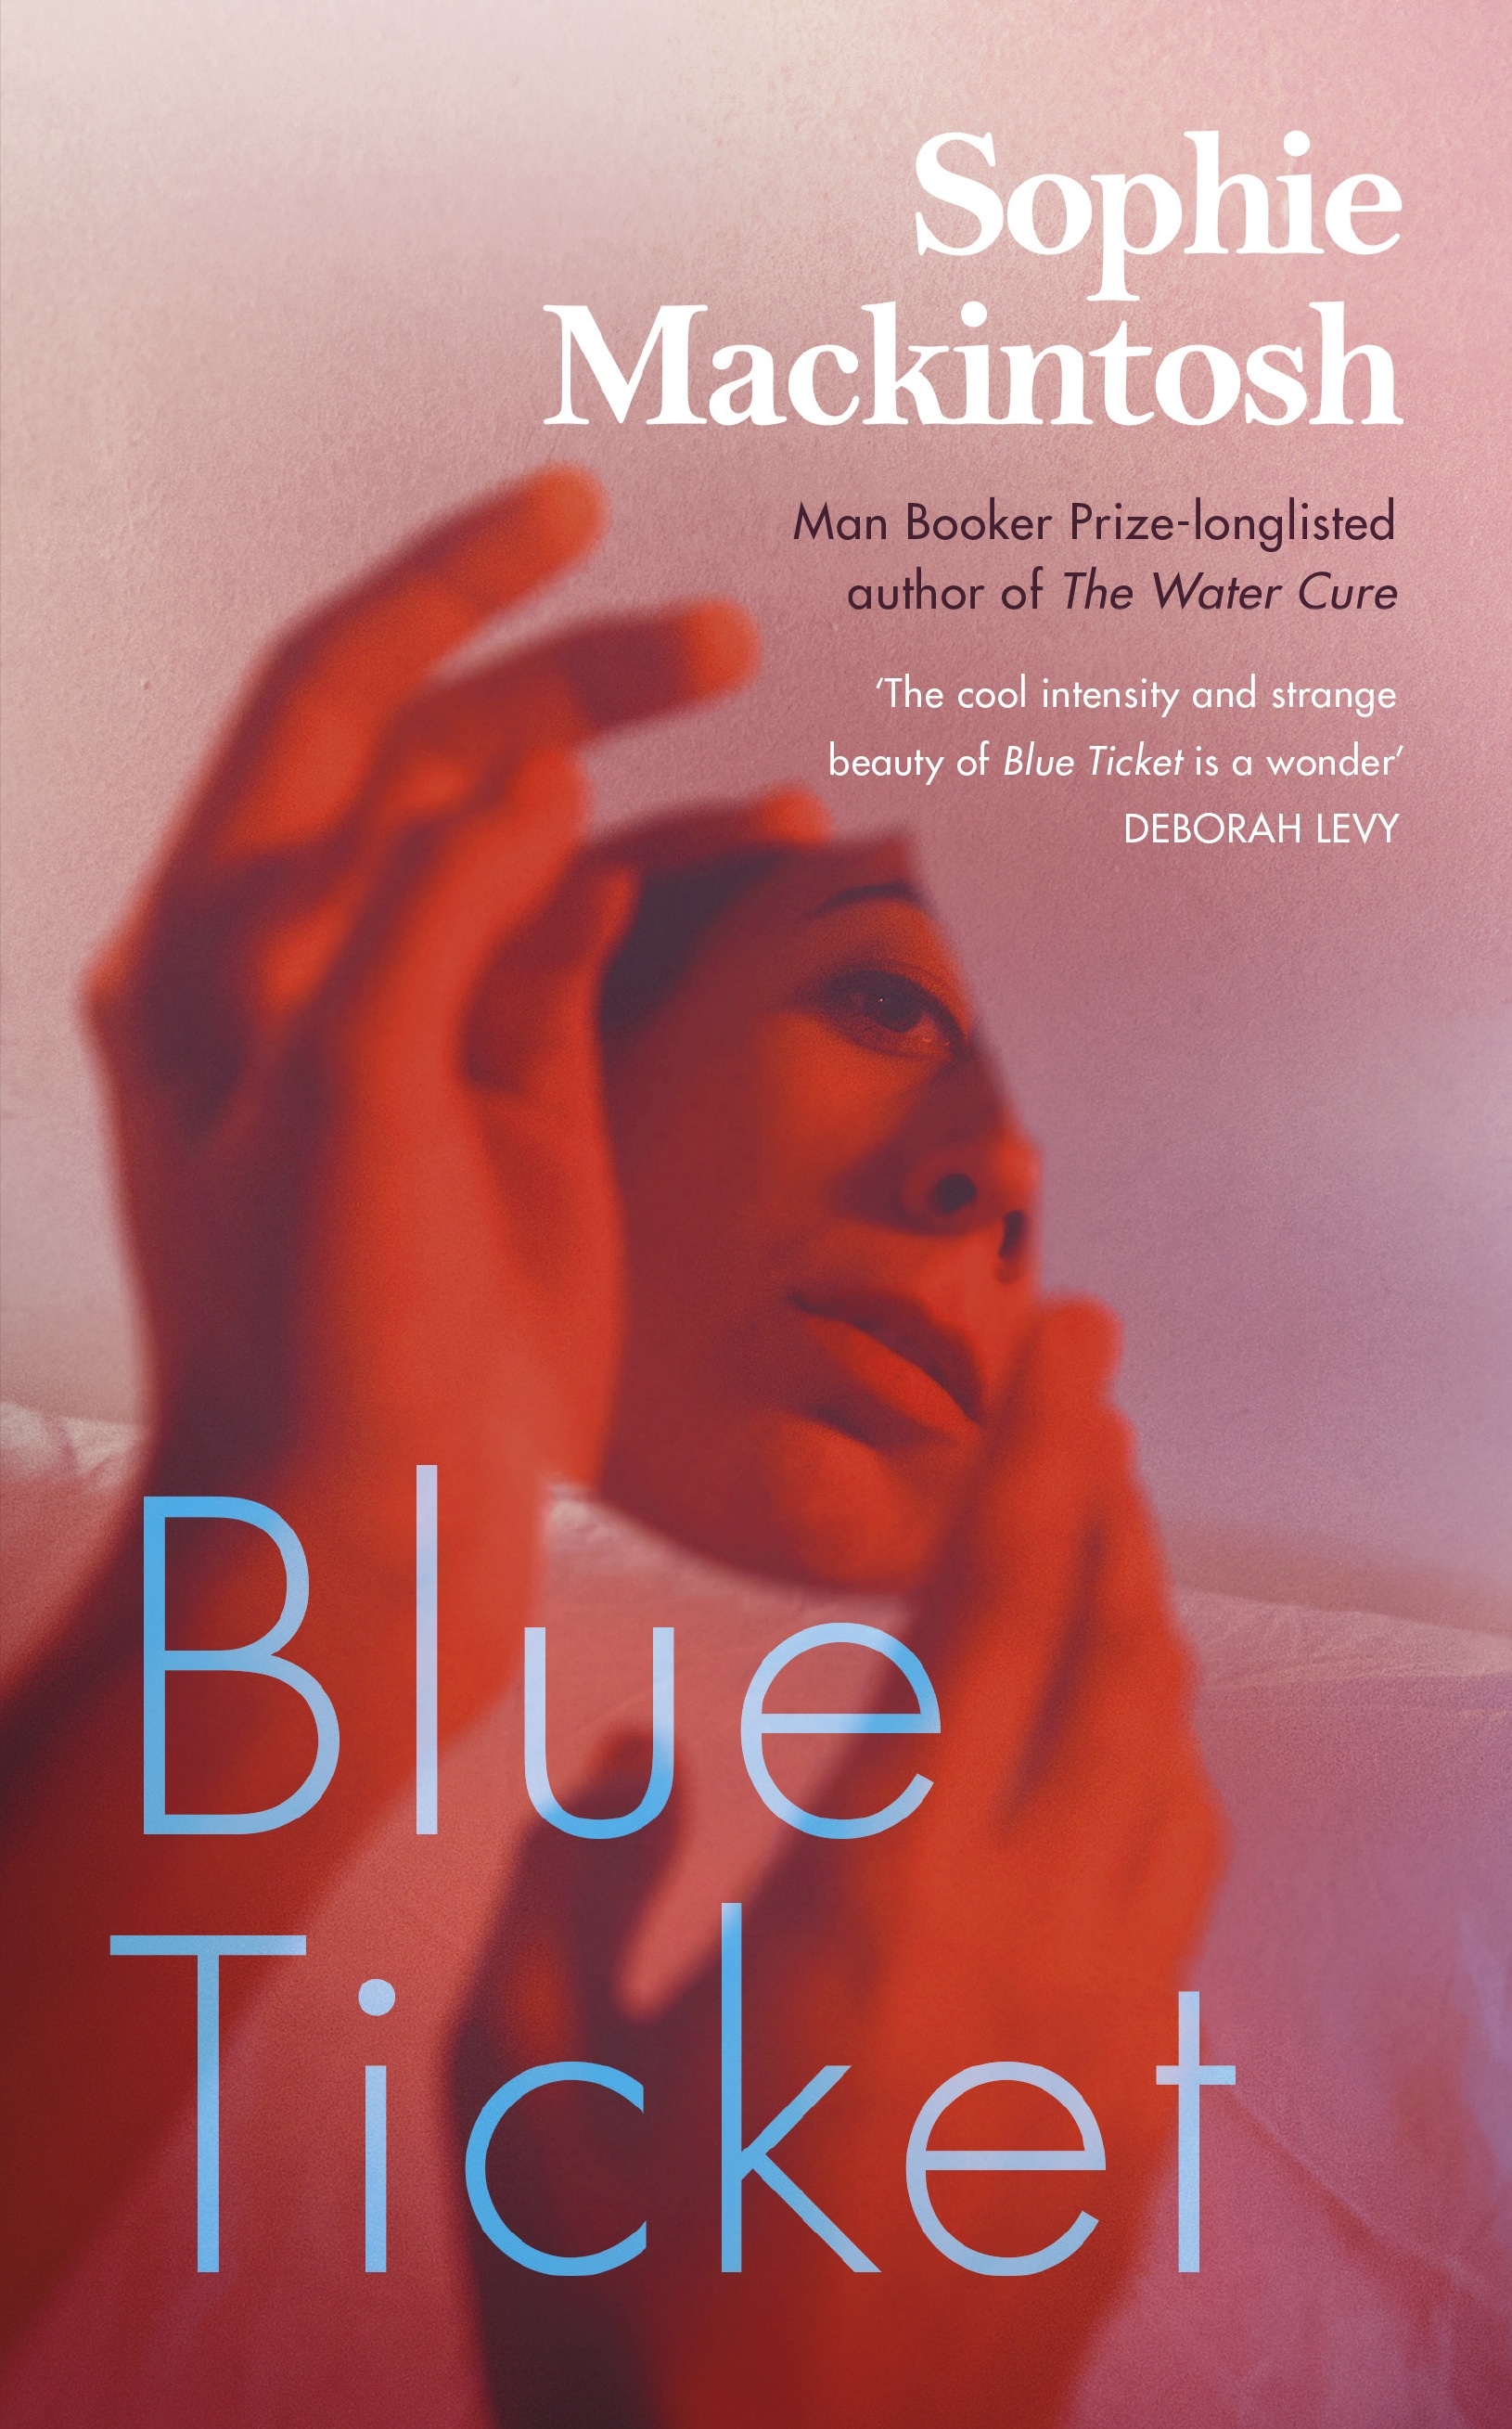 Book “Blue Ticket” by Sophie Mackintosh — August 27, 2020